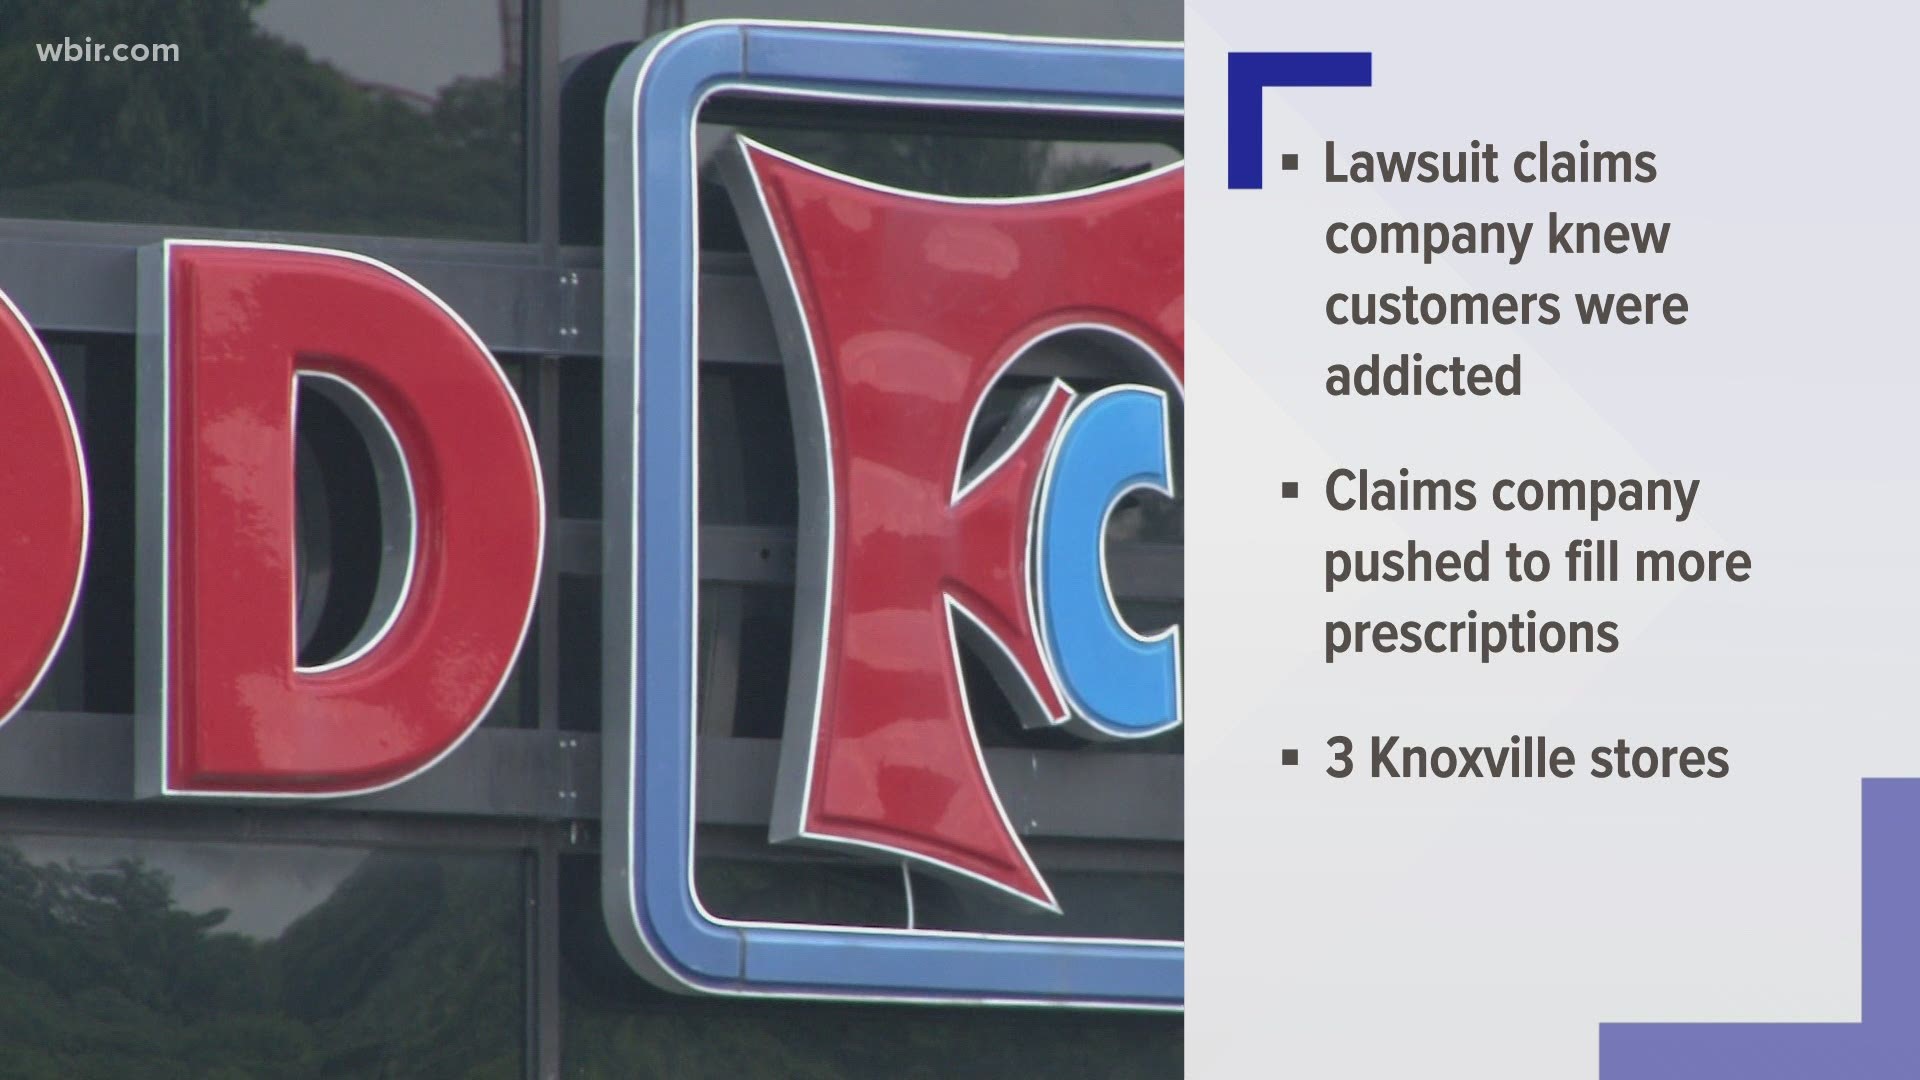 The state said that the company knew its customers were addicted and that pill mills were behind some of the prescriptions.